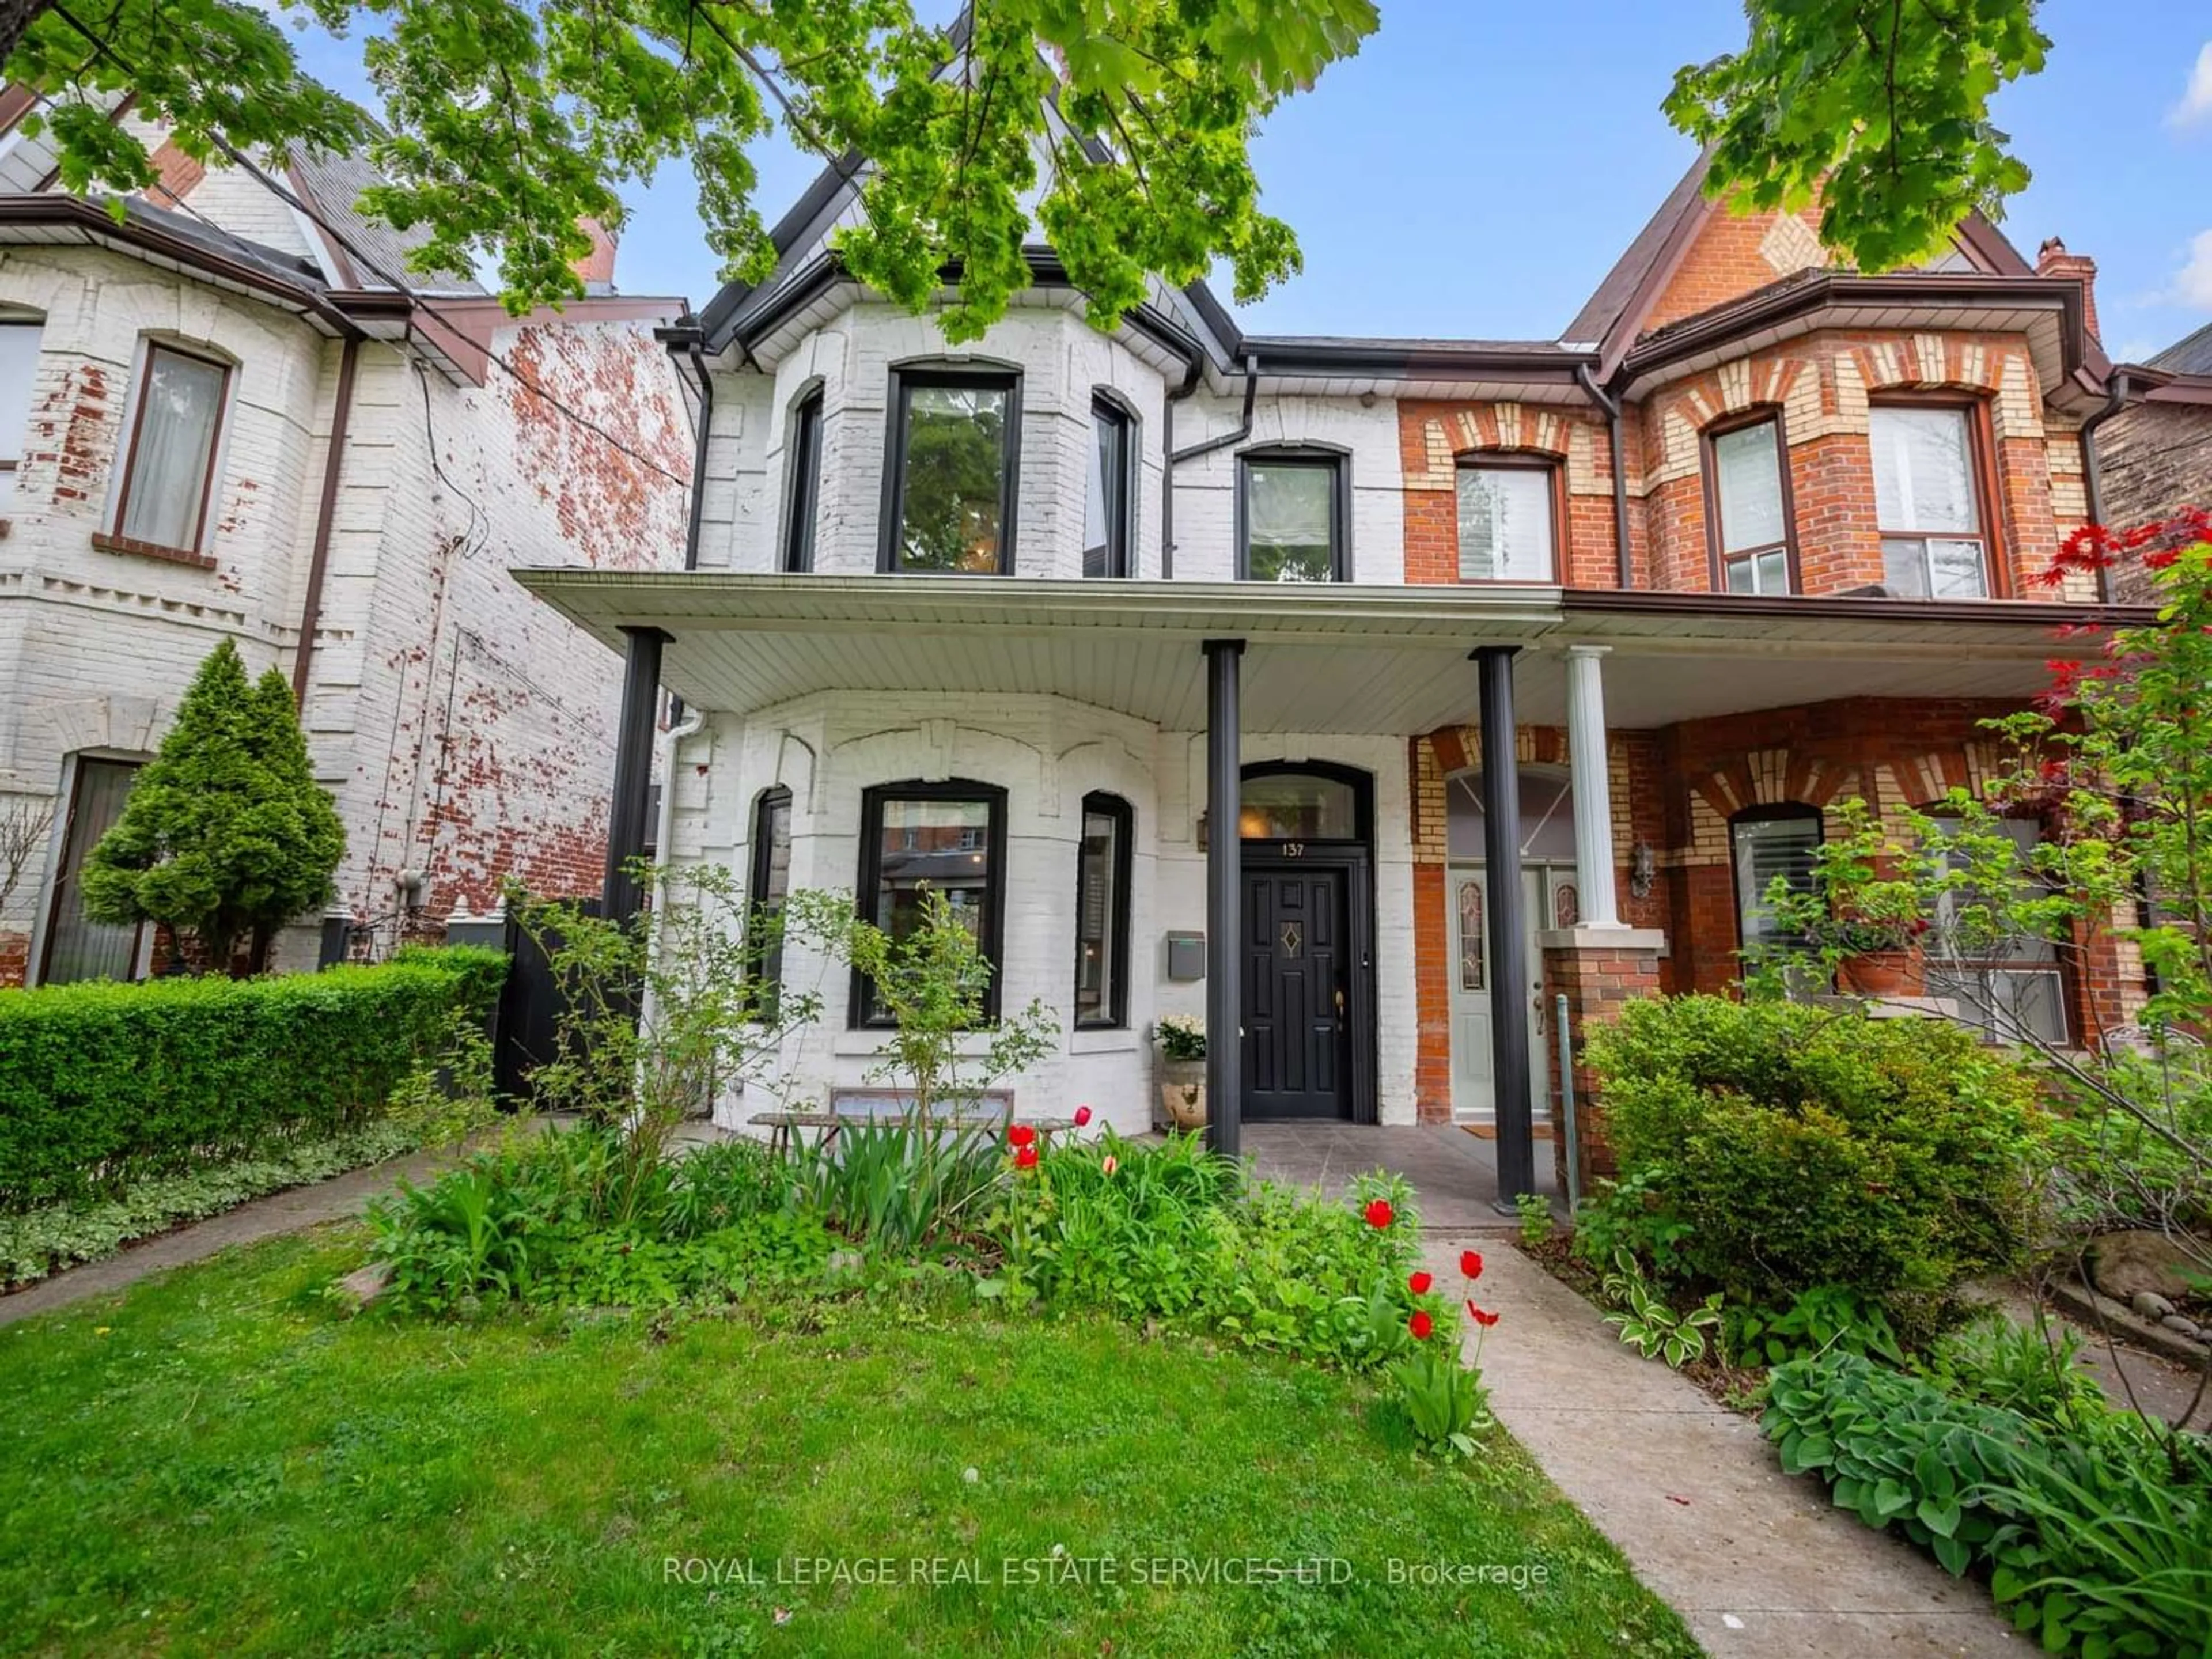 Frontside or backside of a home for 137 Dovercourt Rd, Toronto Ontario M6J 3C5